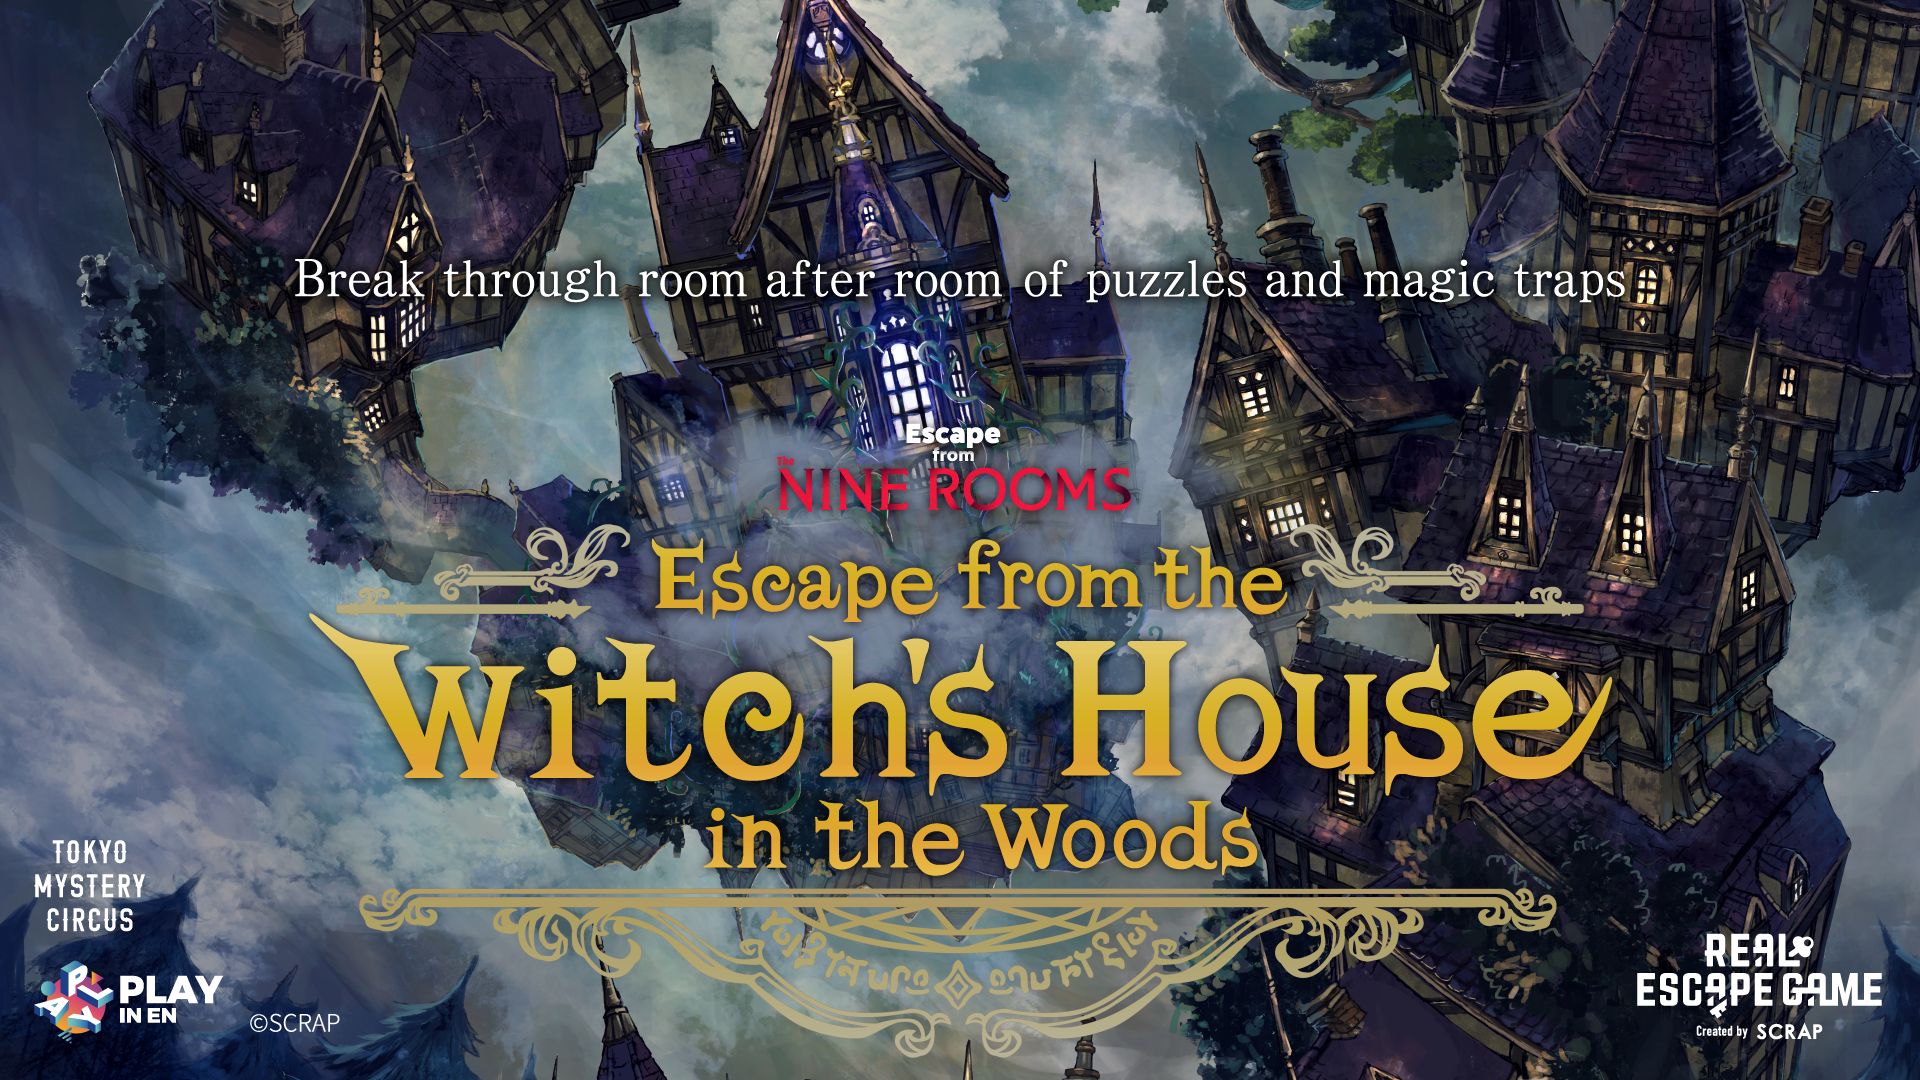 Escape from the Witch's House in the Woods